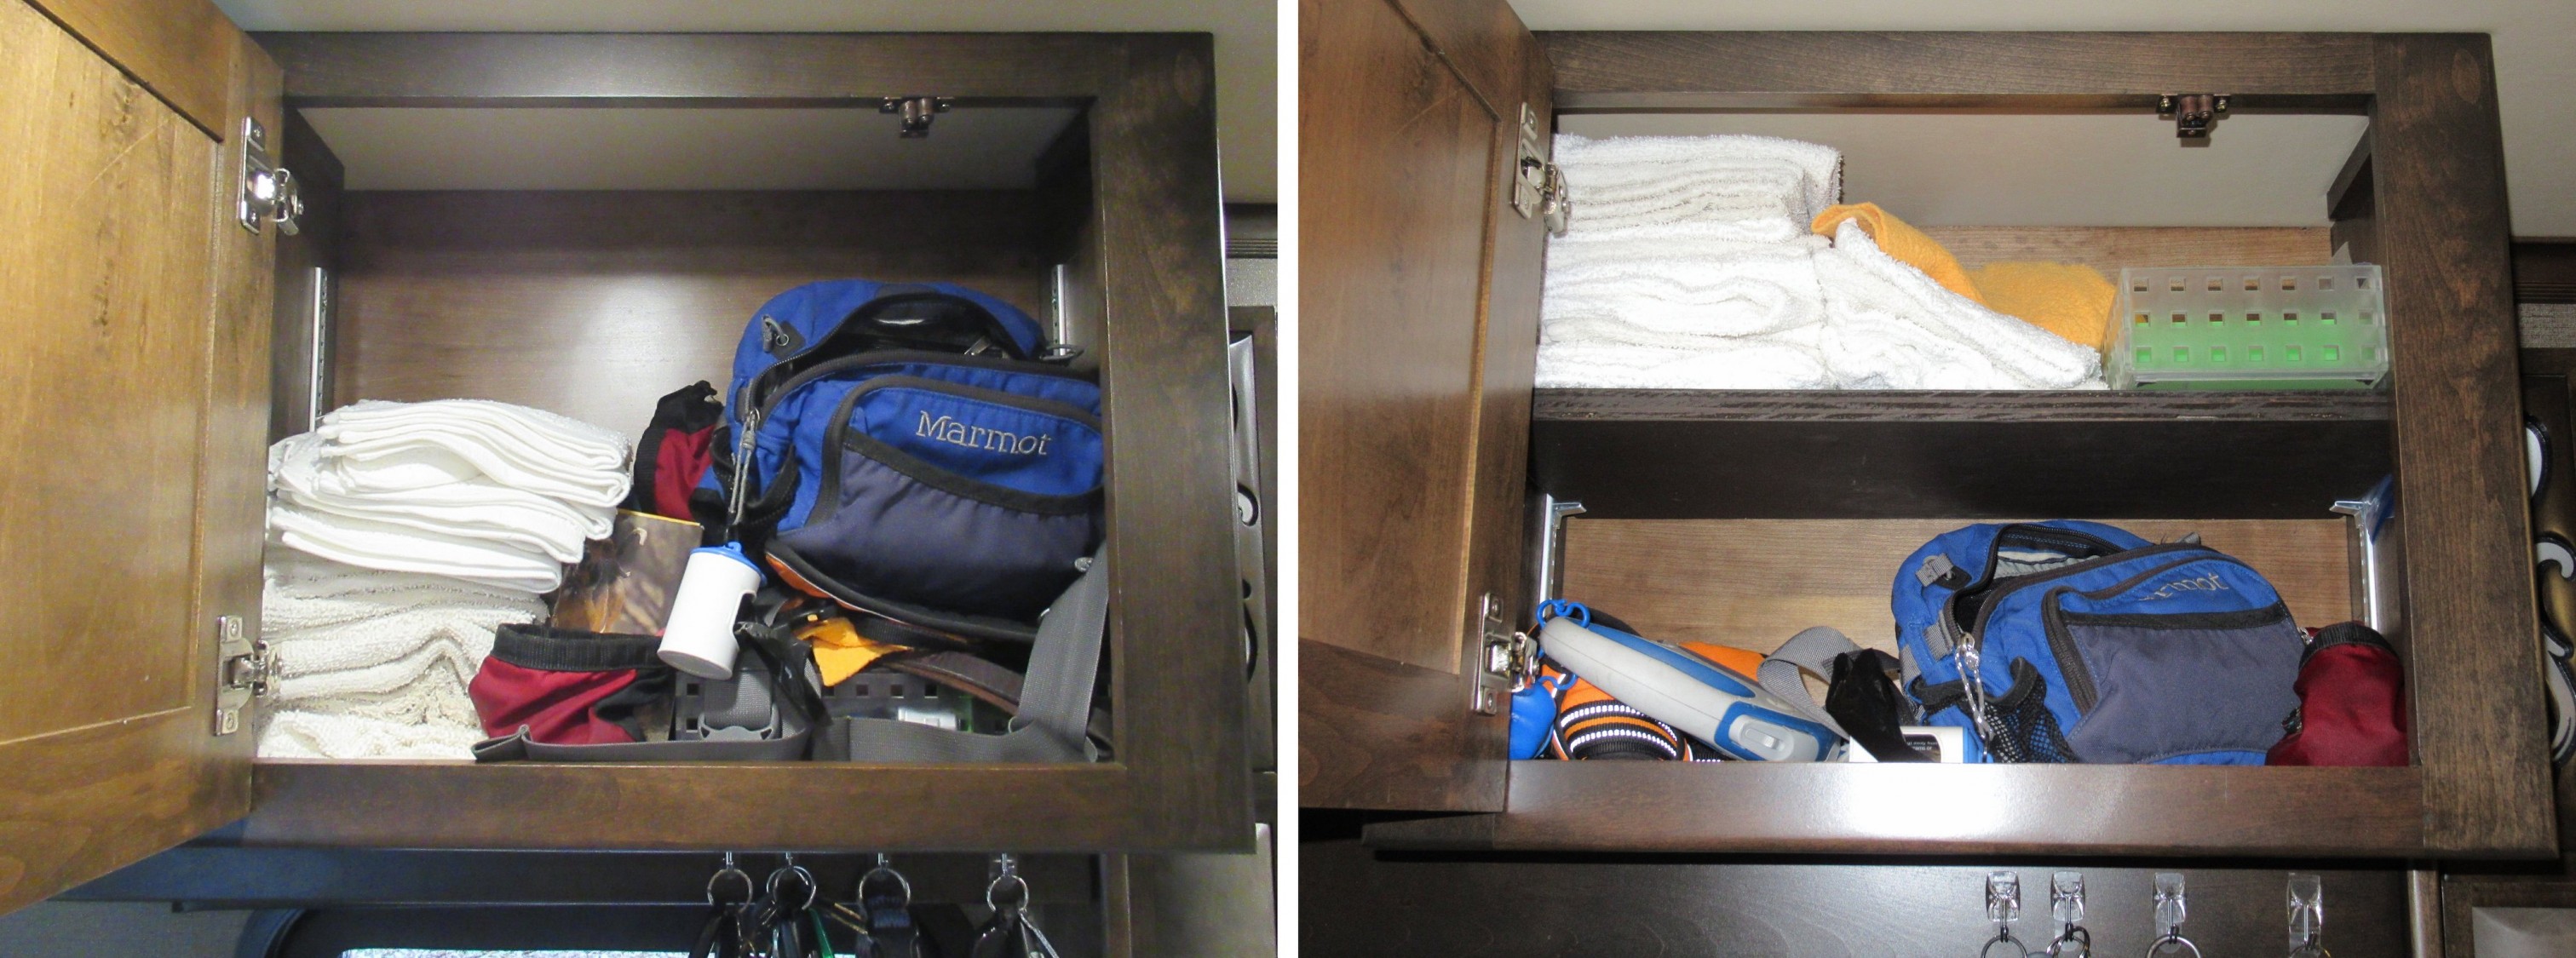 RV Organizing: Dont Be a Hot Mess  Camper organization, Camper storage, Rv  organization